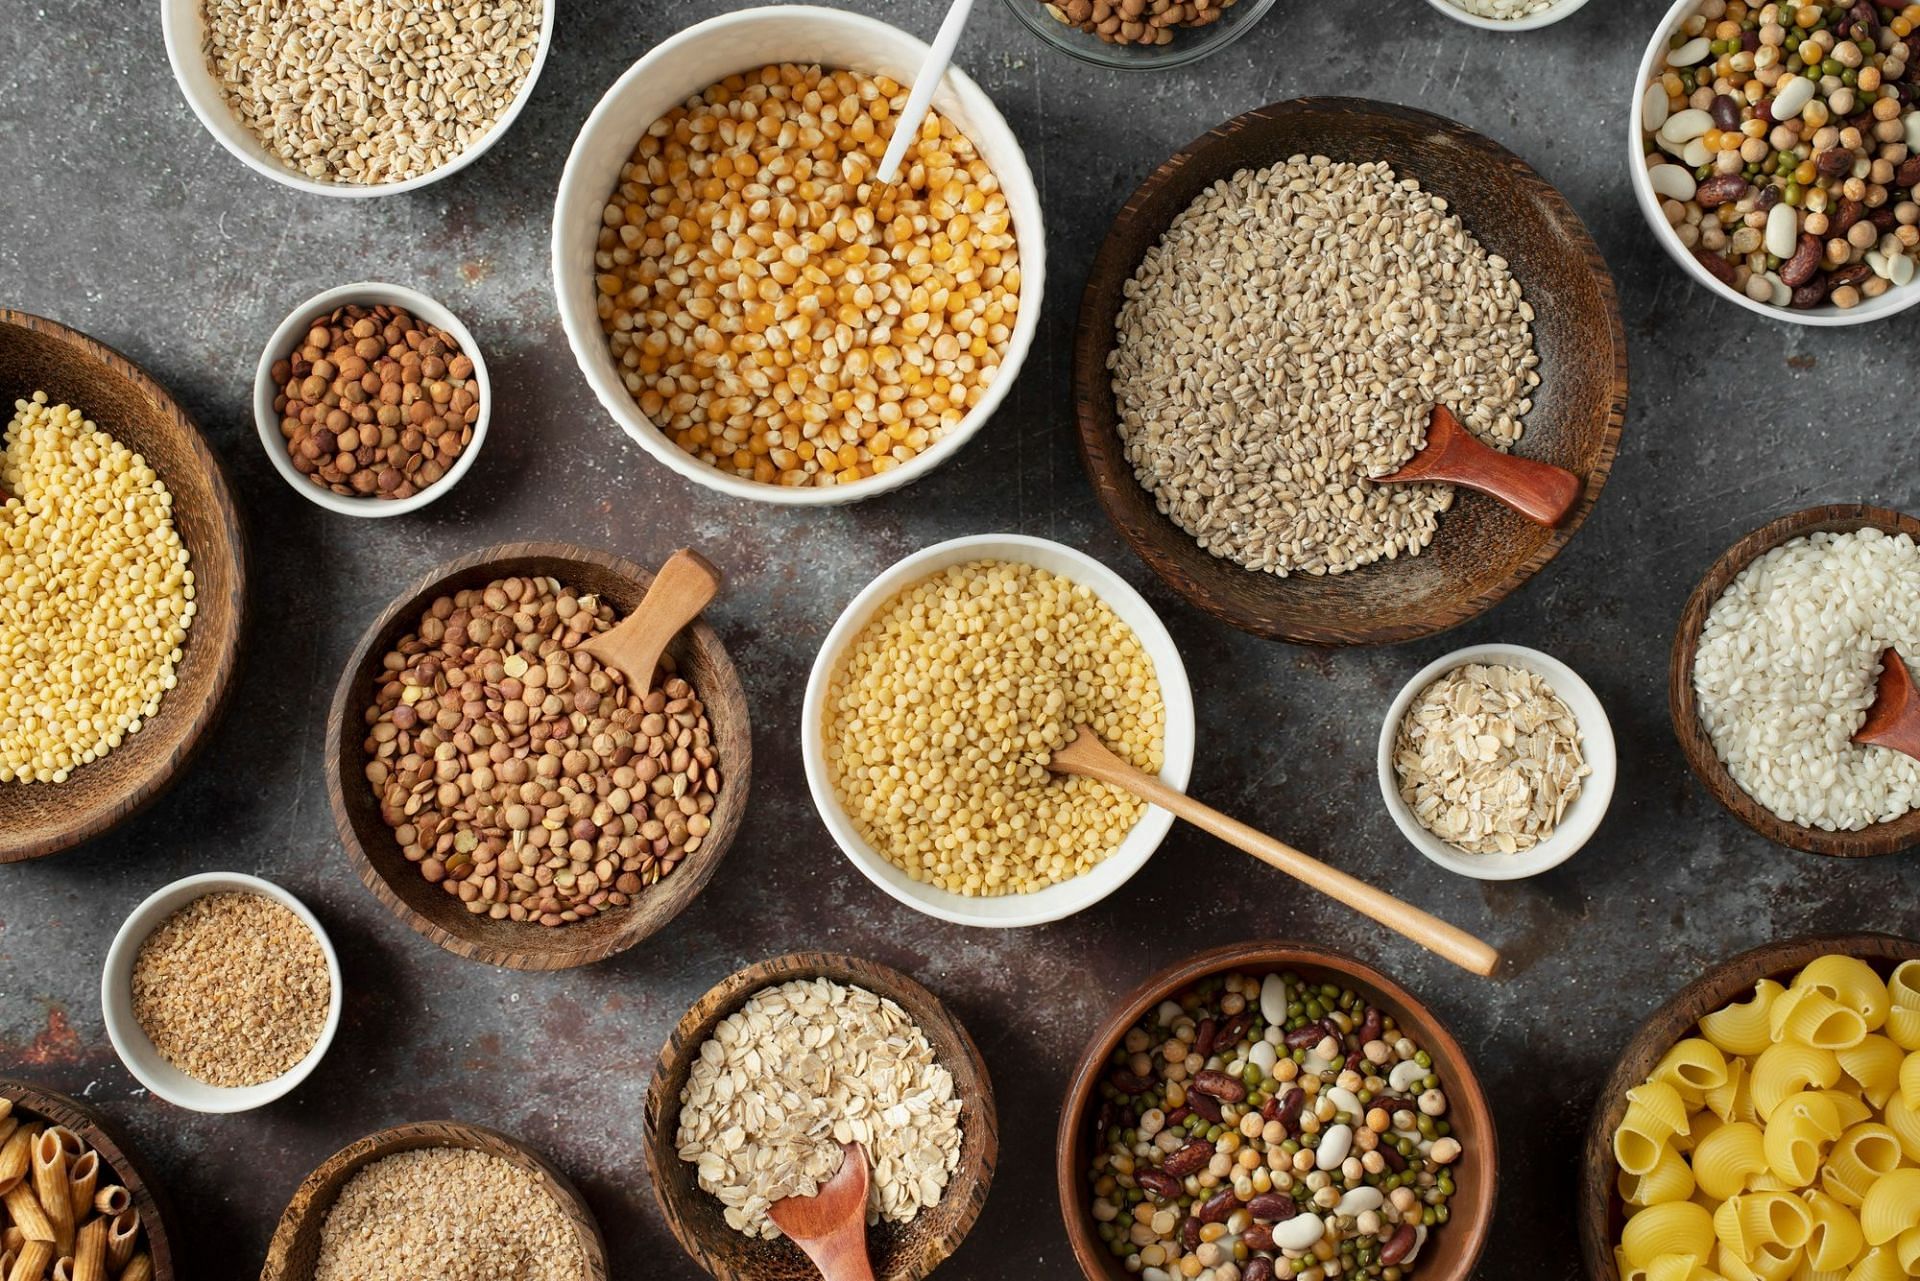 Whole grains diet to relieve stress (Image by Freepik)